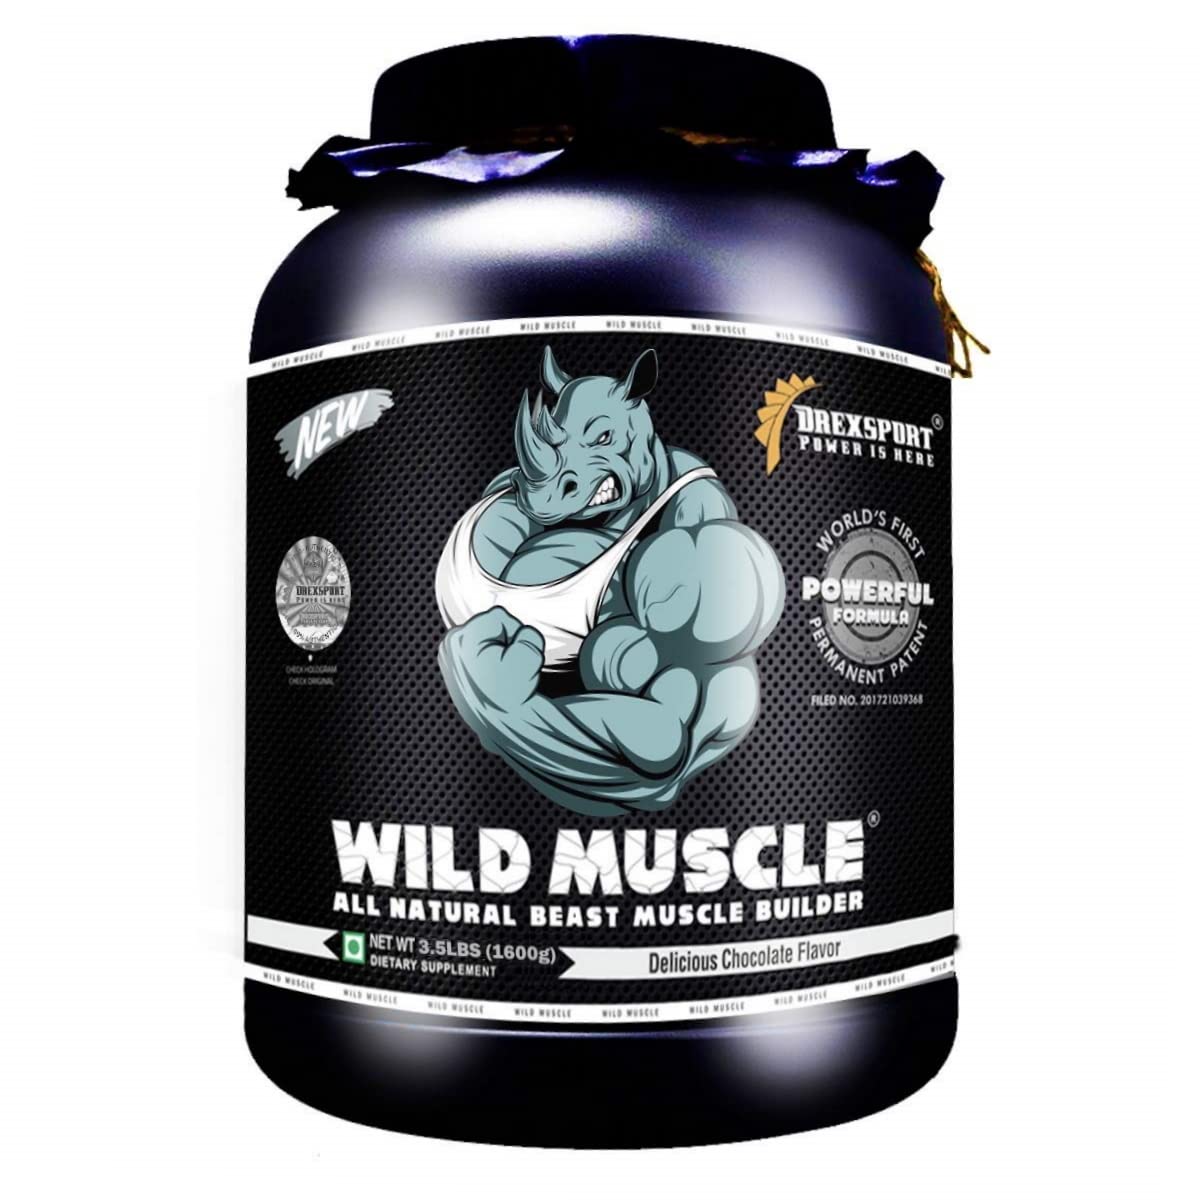 Drexsport Wild Muscle Chocolate Flavour Image